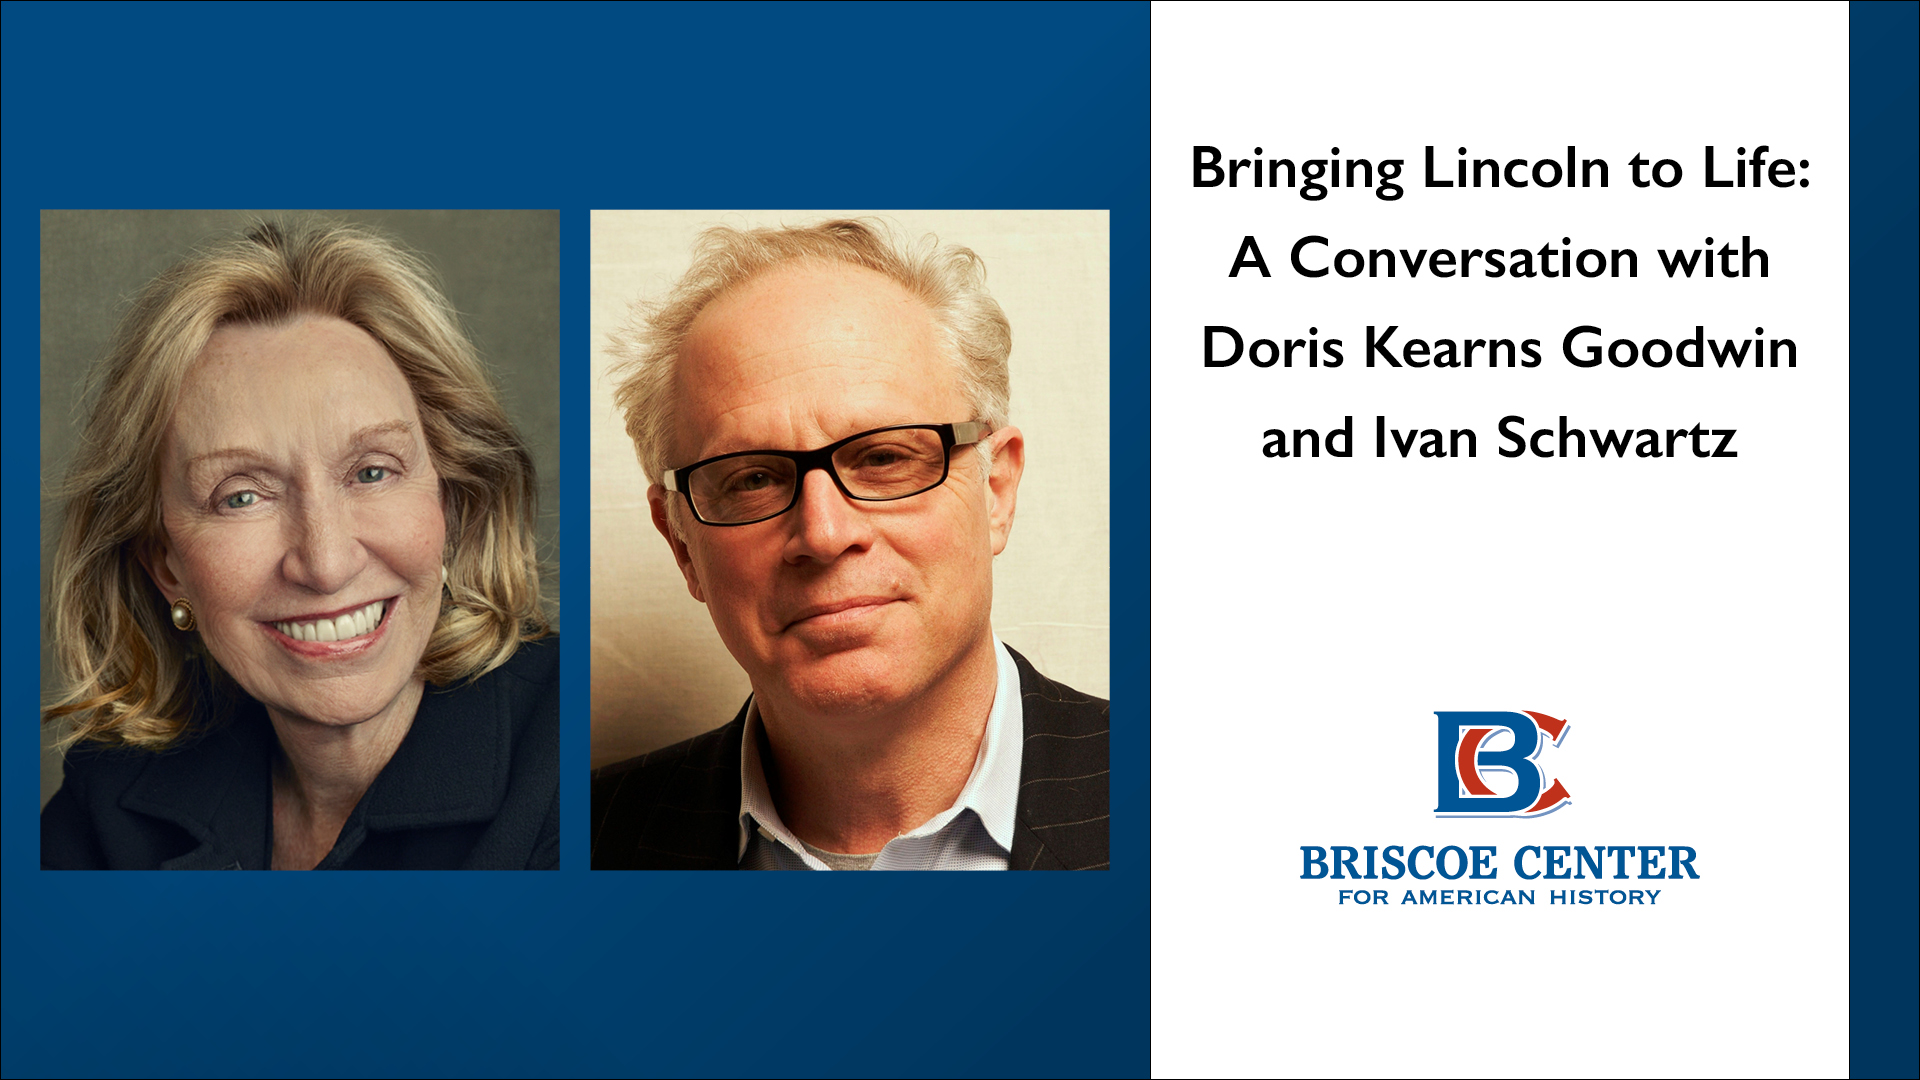 Bringing Lincoln to Life: A Conversation with Doris Kearns Goodwin and Ivan Schwartz